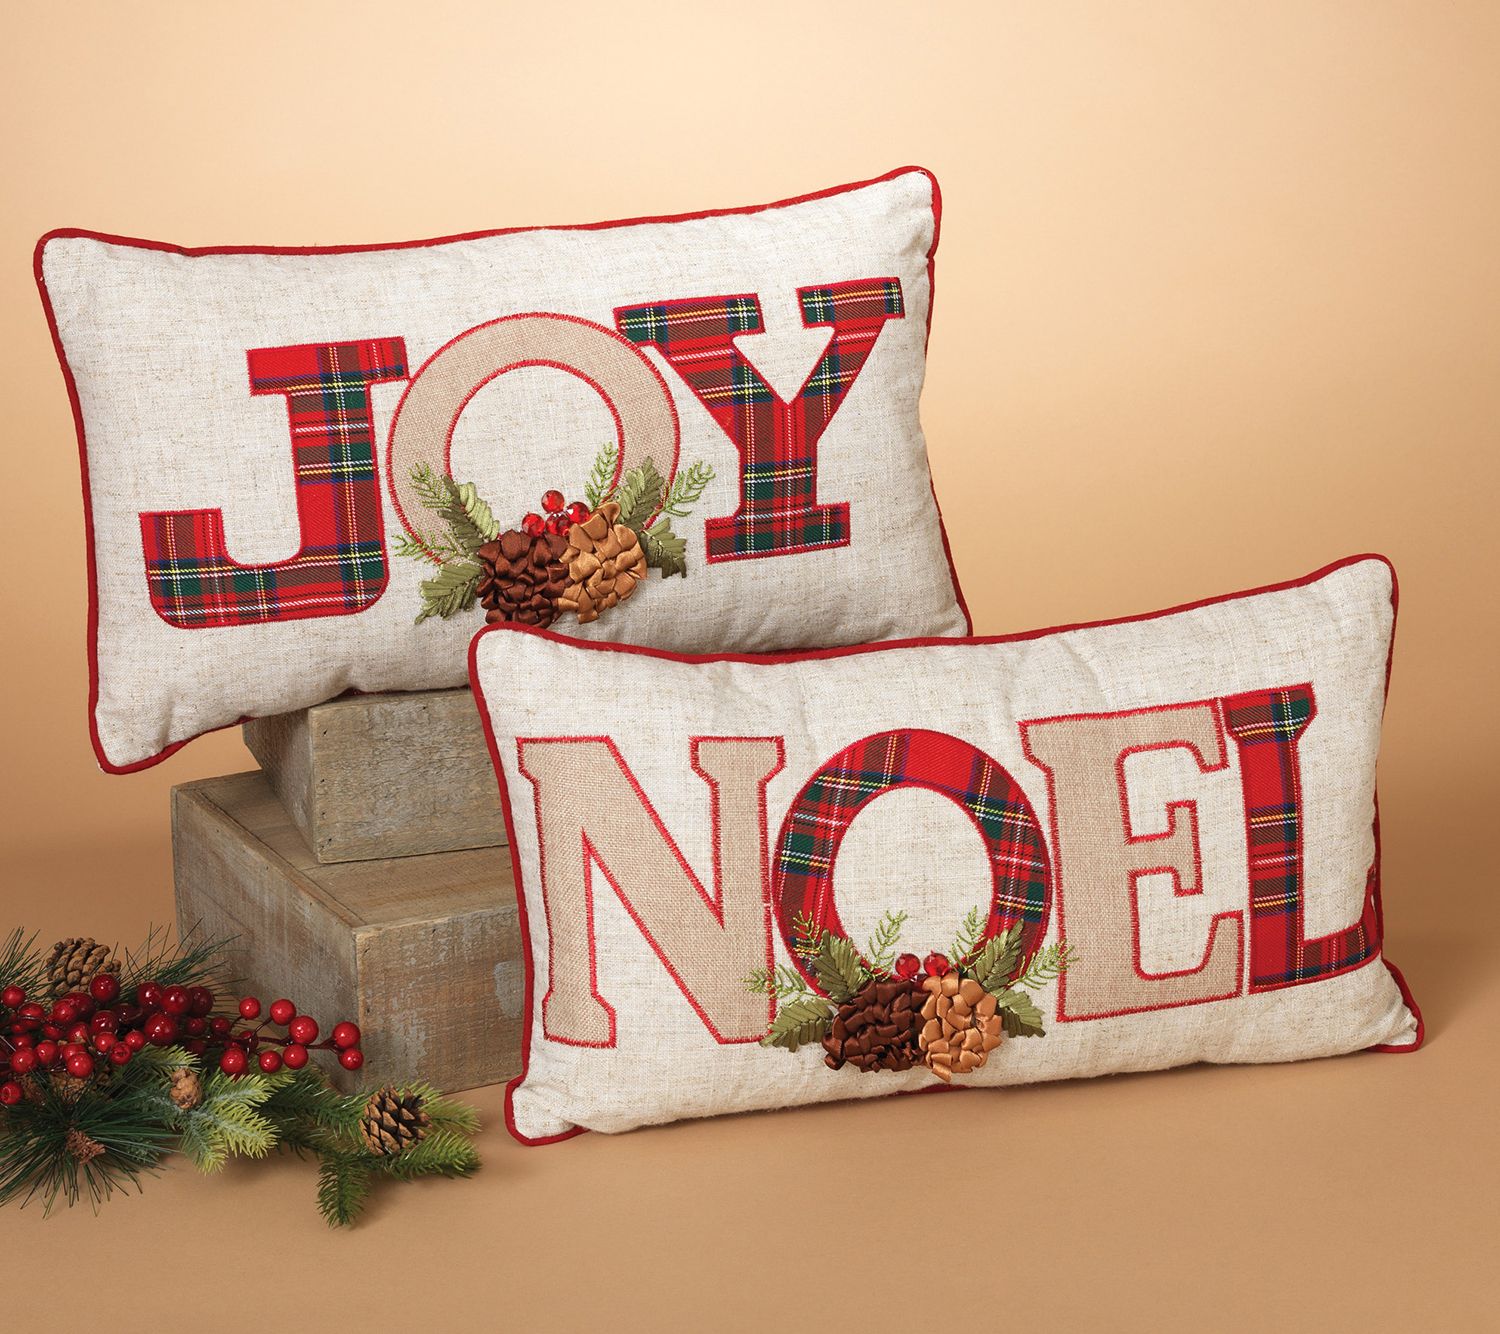 Set of 2 Red Beaded Joy and Noel Christmas Throw Pillows 19